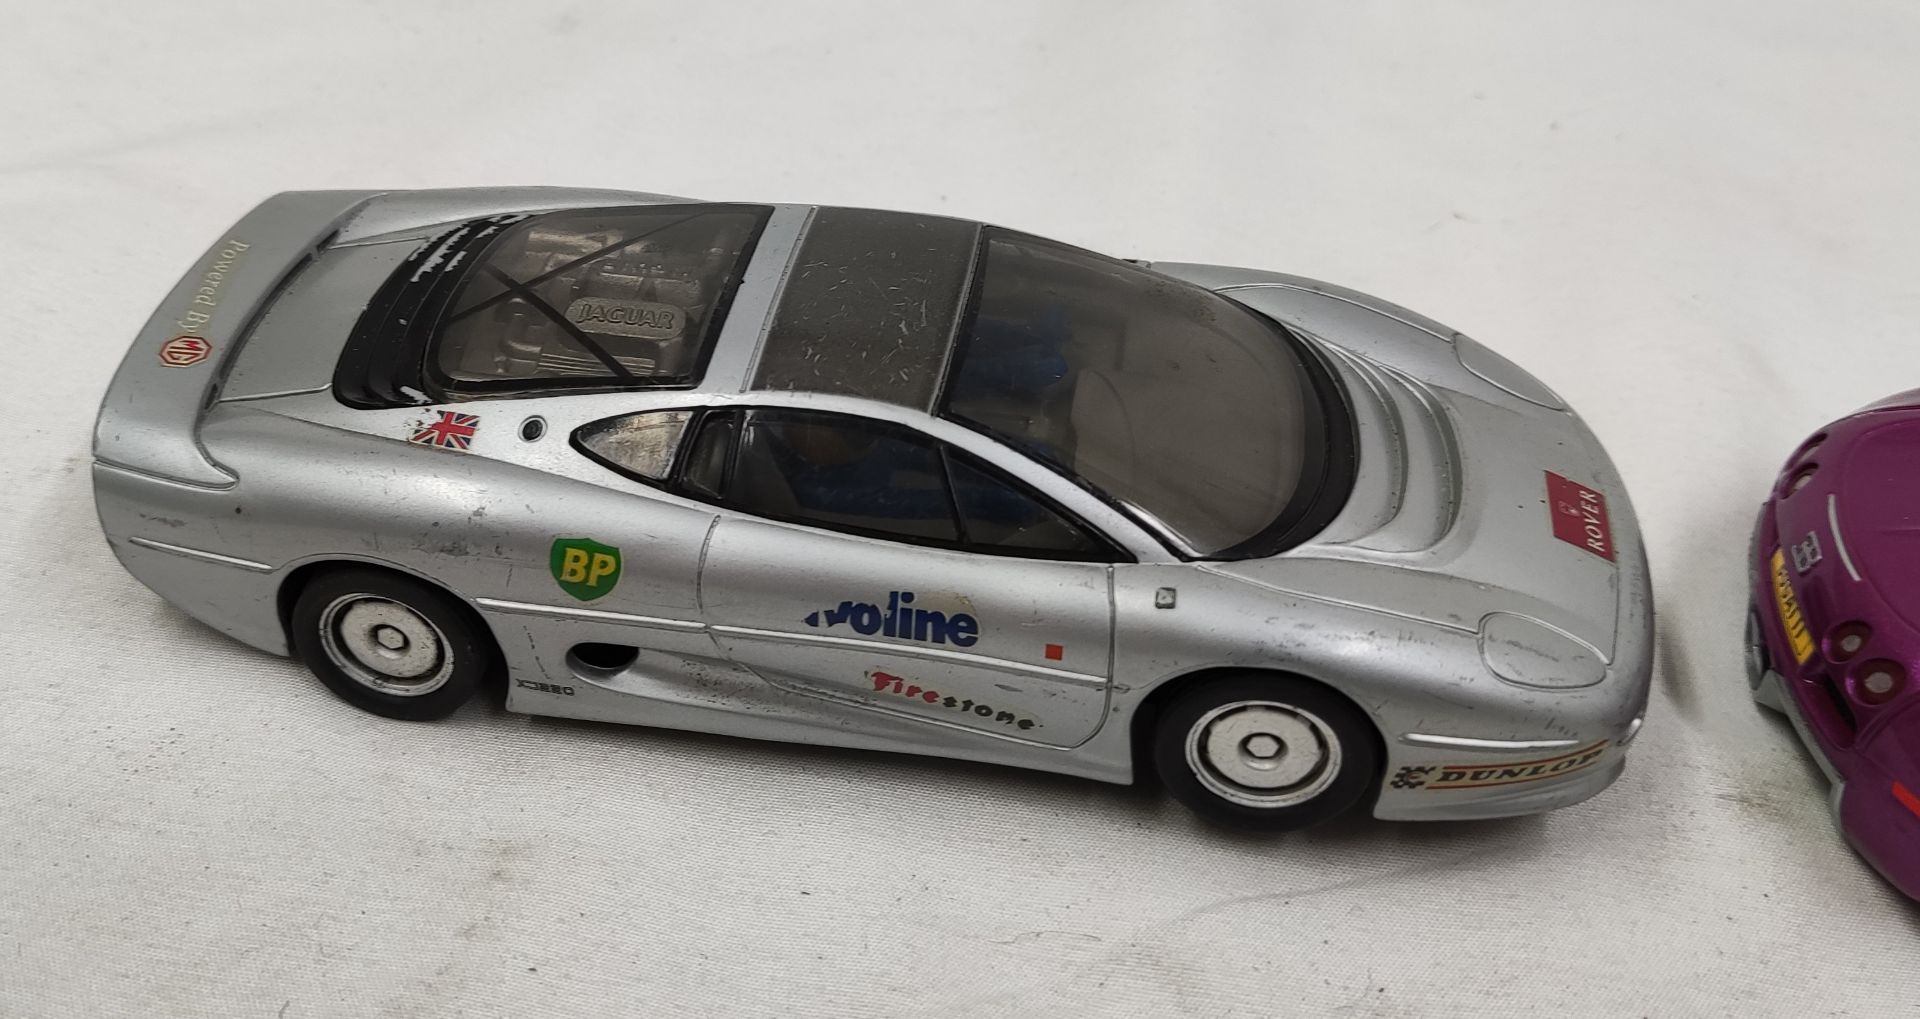 3 x Scalextric Cars - Includes Jaguar XJ220, Bugatti and LM Cars - Tested and Working - Used - CL444 - Image 9 of 14